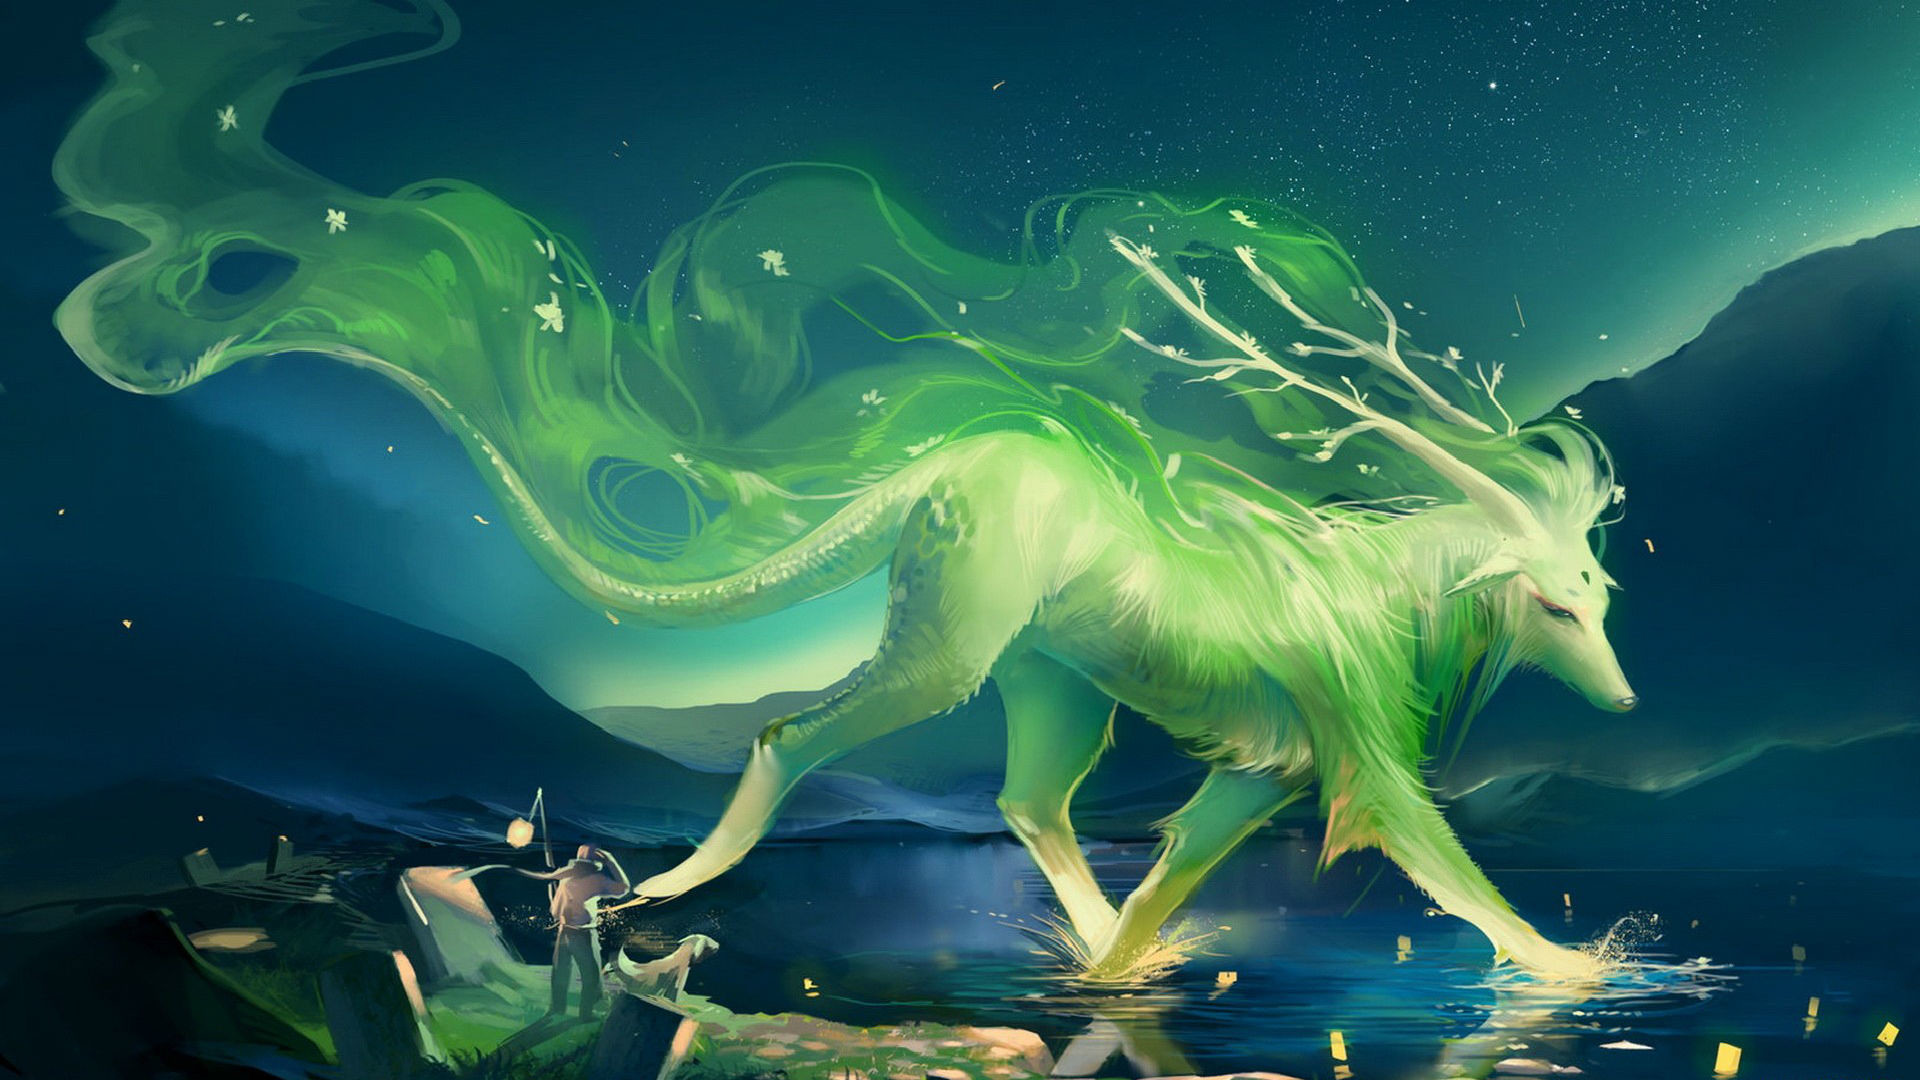 1920x1080 Wallpaper and background photos of FanTasy CreaTure for fans of Magical  Creatures images.